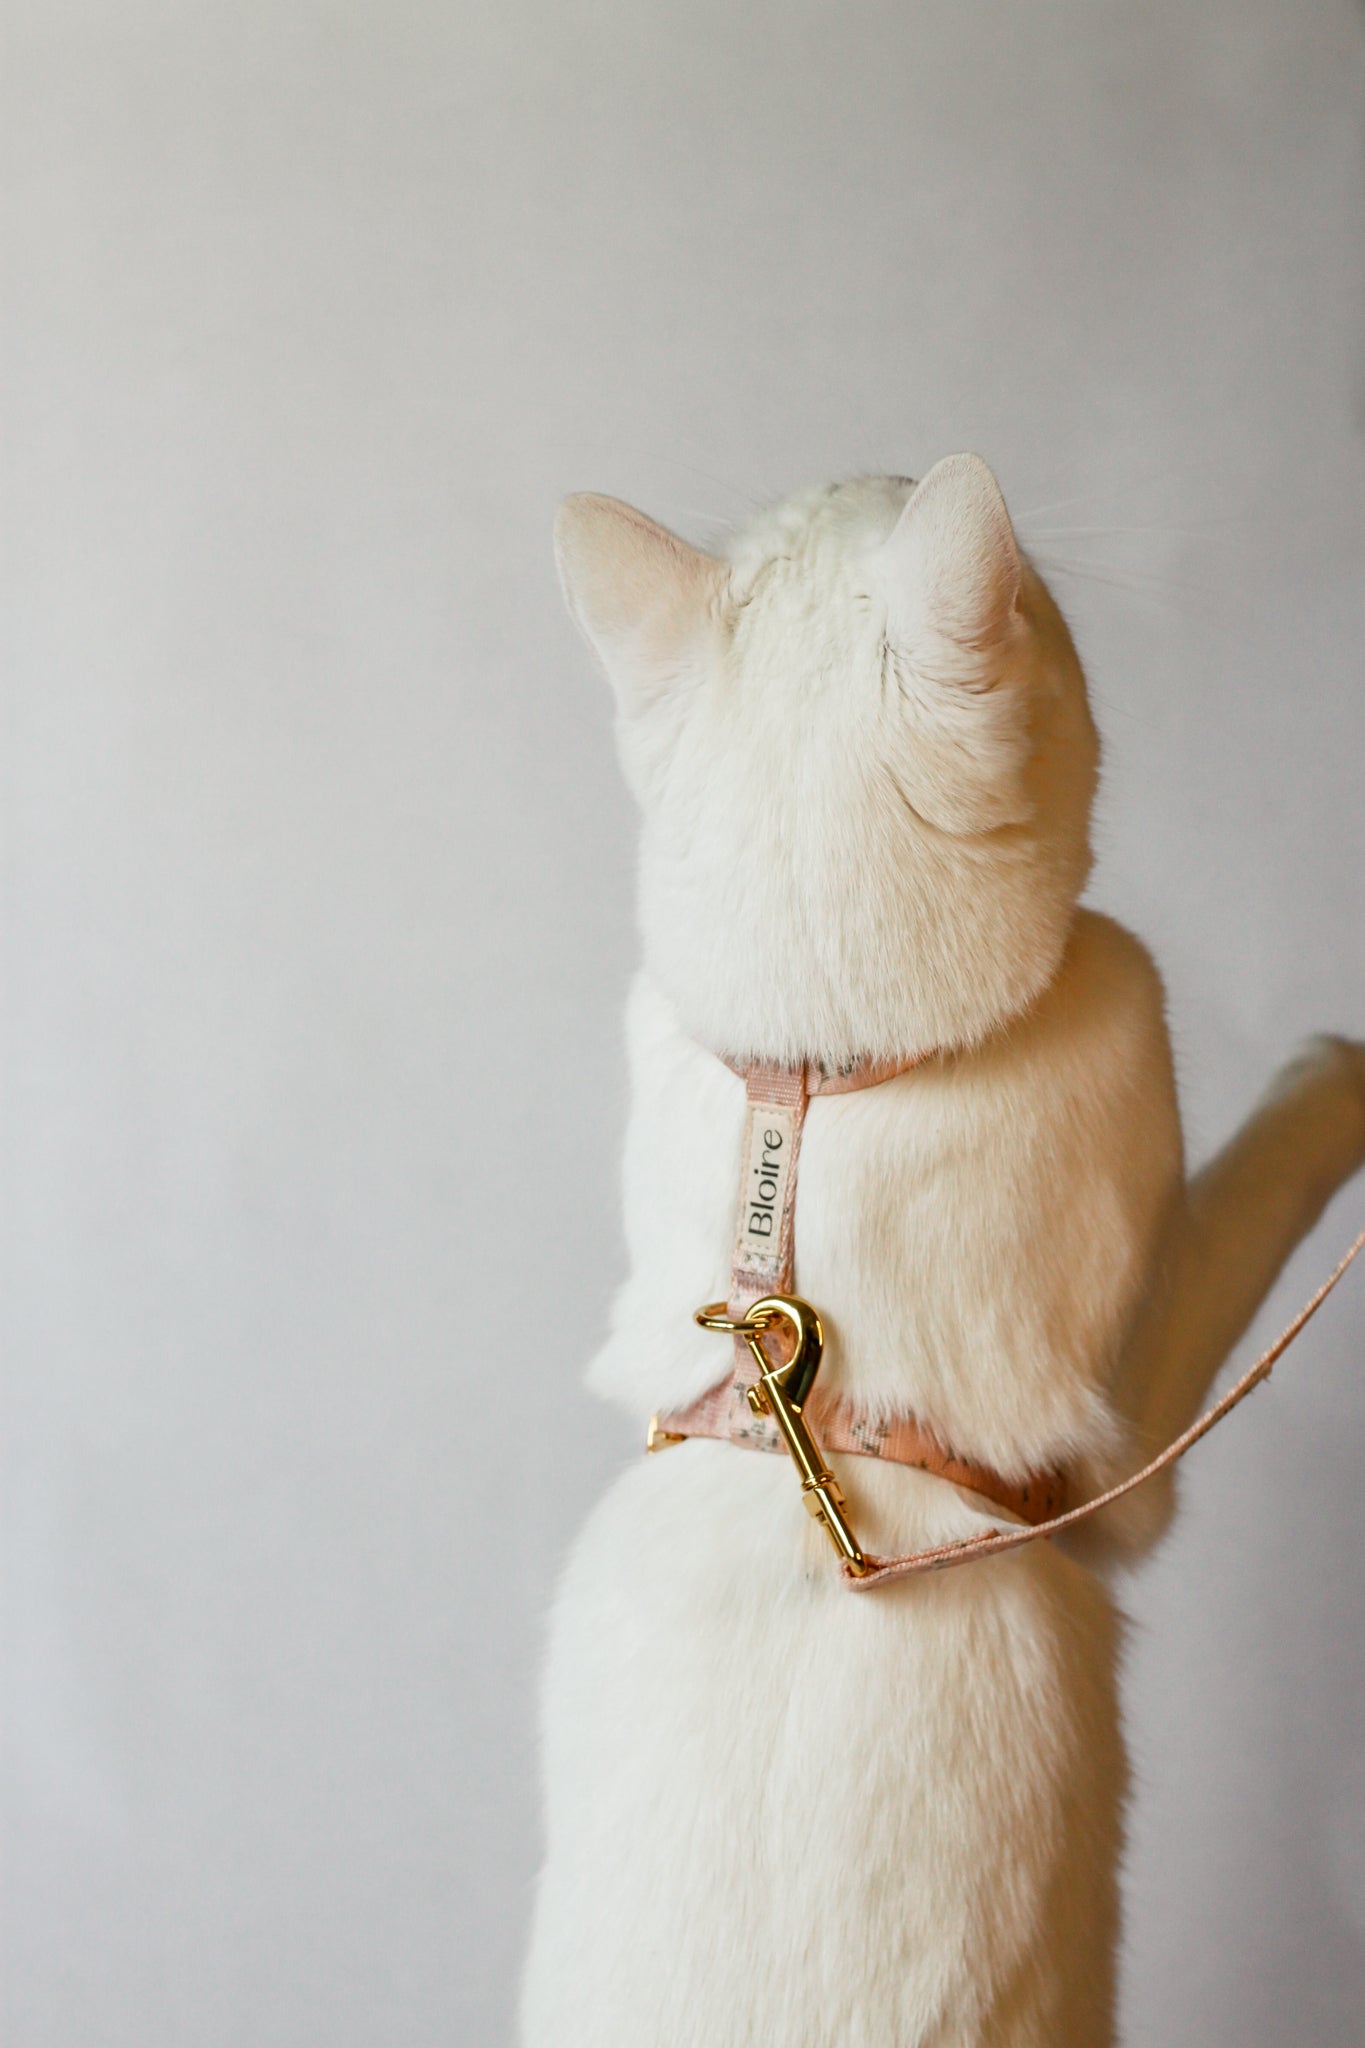 Cat Wearing a Leash and Harness